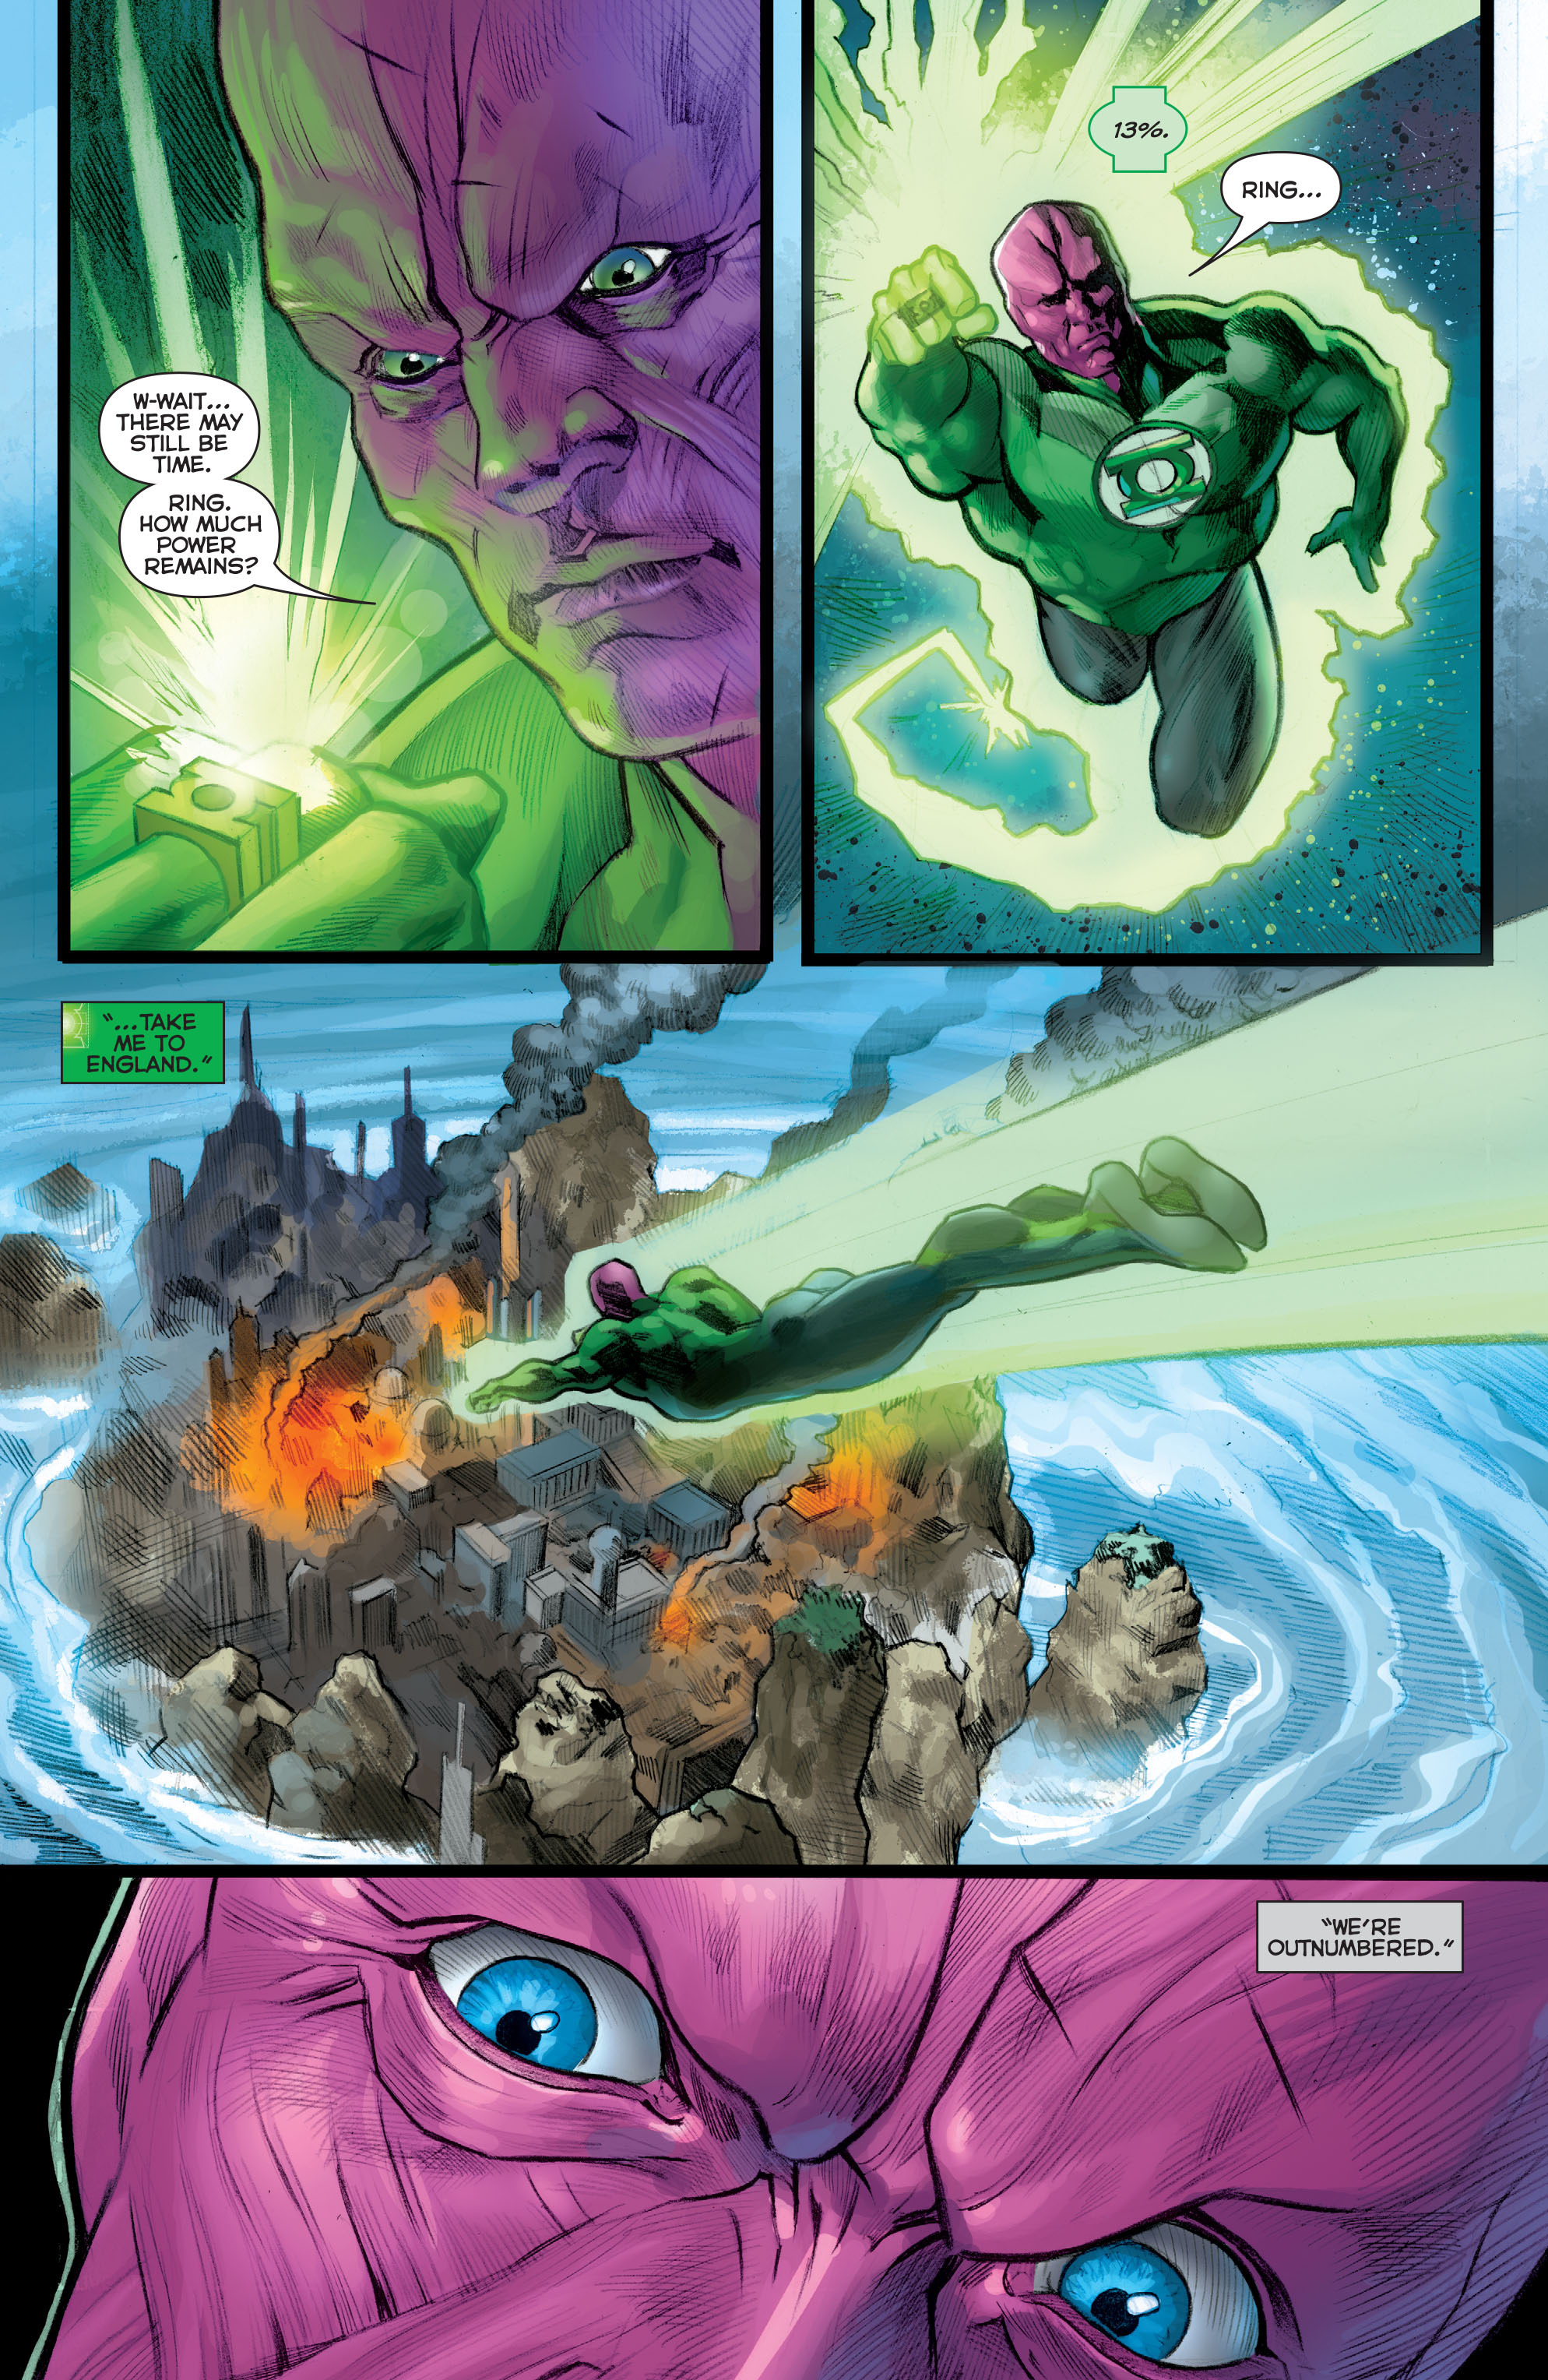 Flashpoint: The World of Flashpoint Featuring Green Lantern Full #1 - English 54